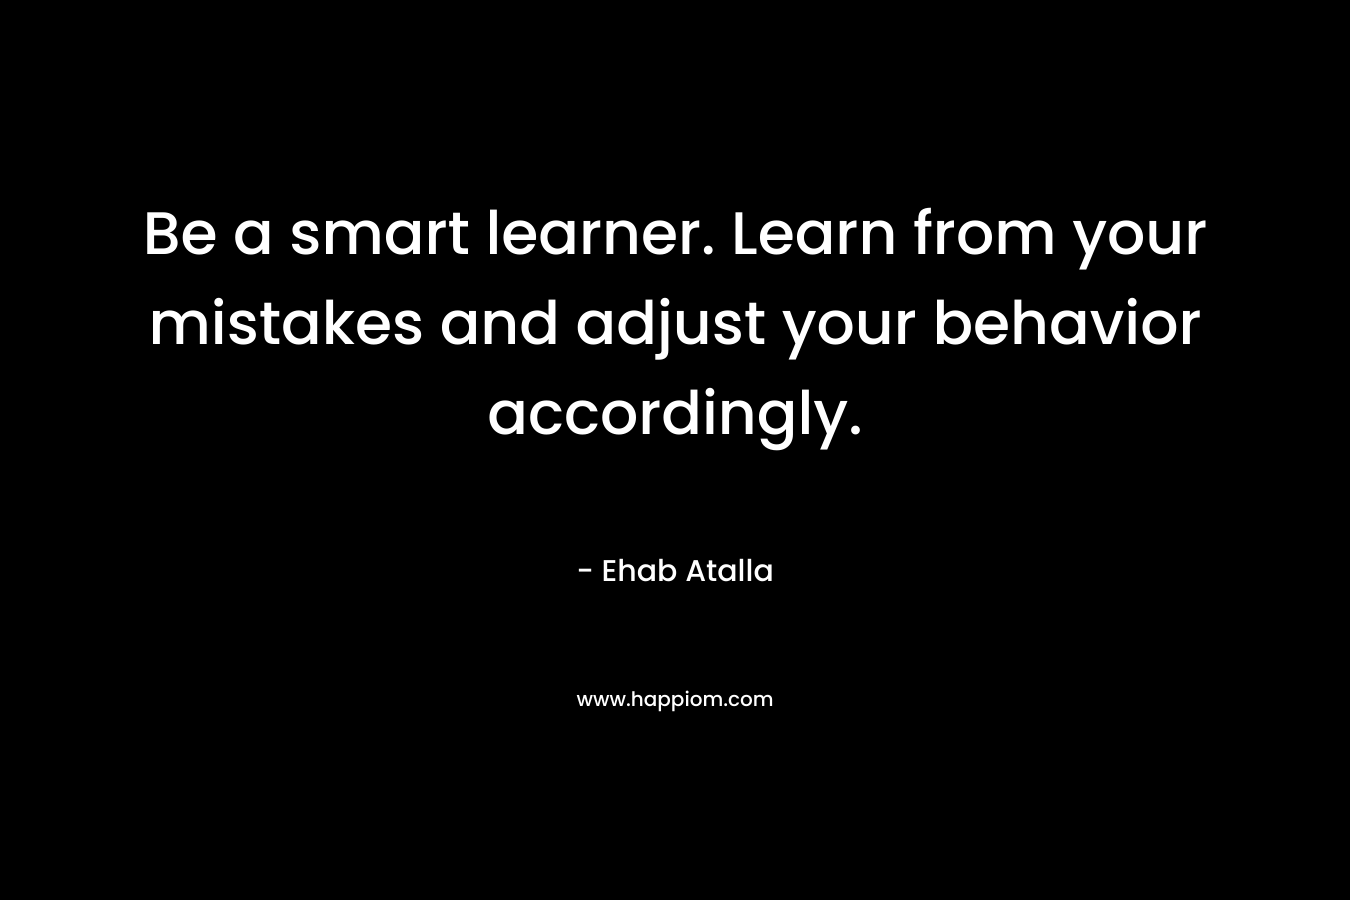 Be a smart learner. Learn from your mistakes and adjust your behavior accordingly. – Ehab Atalla